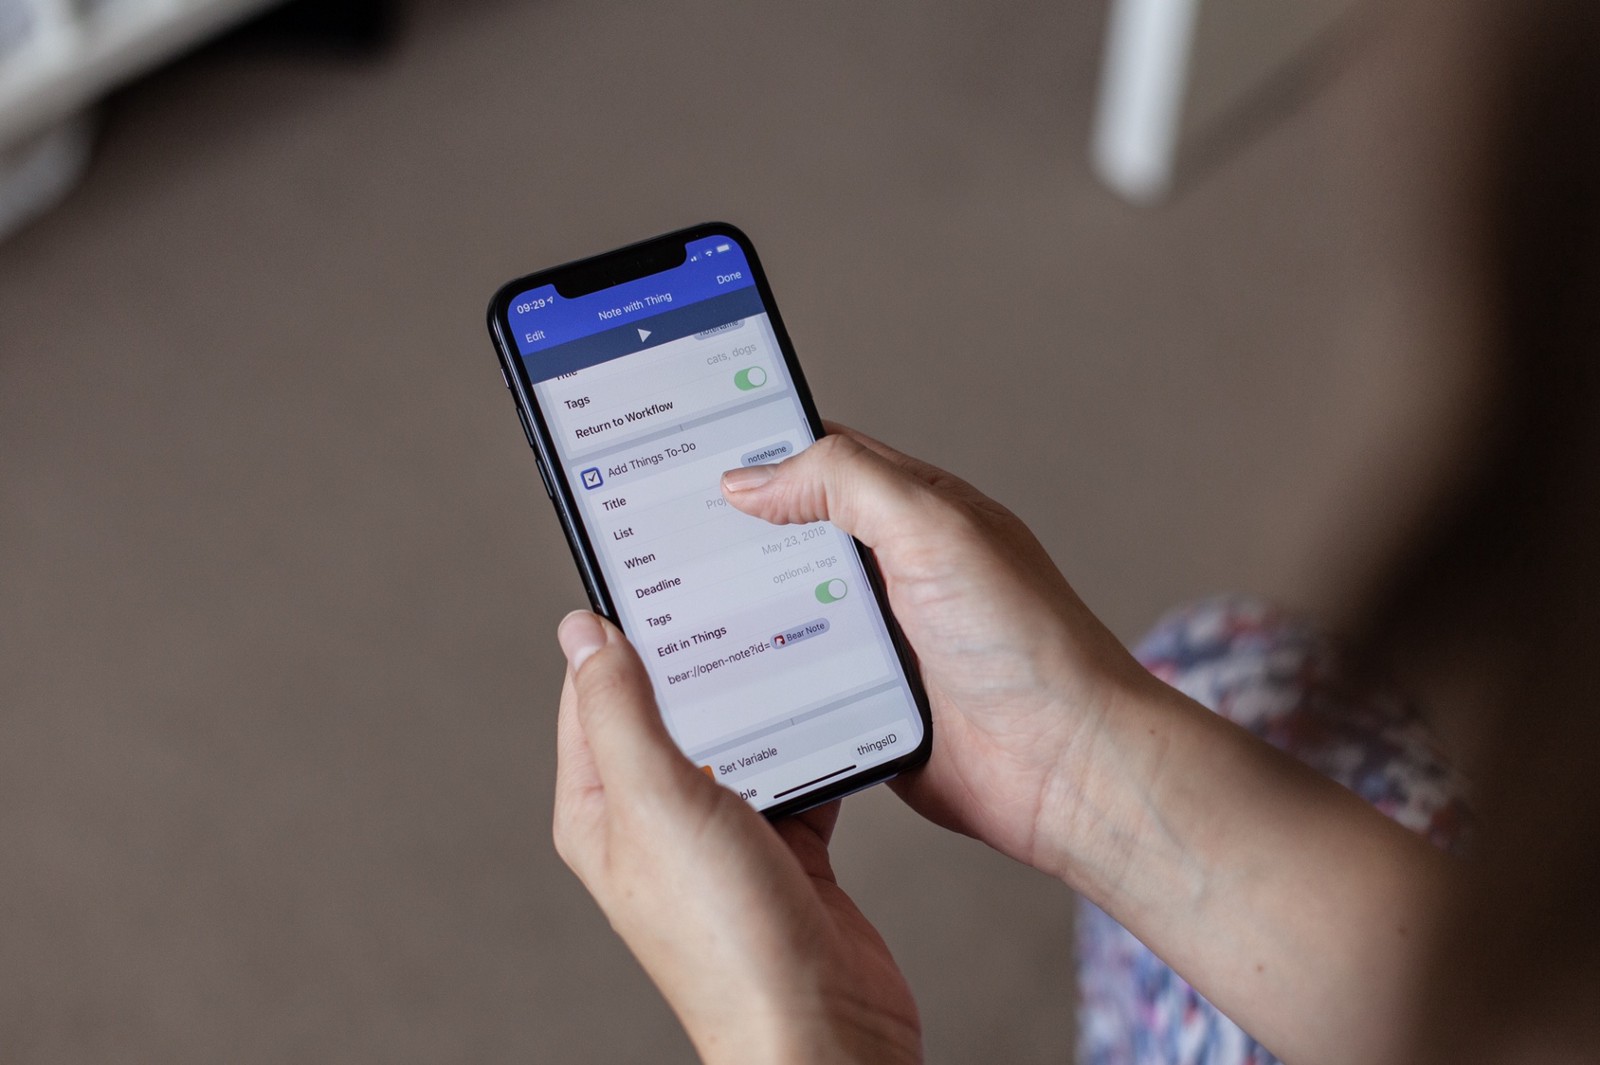 Woman's hands holding an iPhone X and pressing on a control on screen